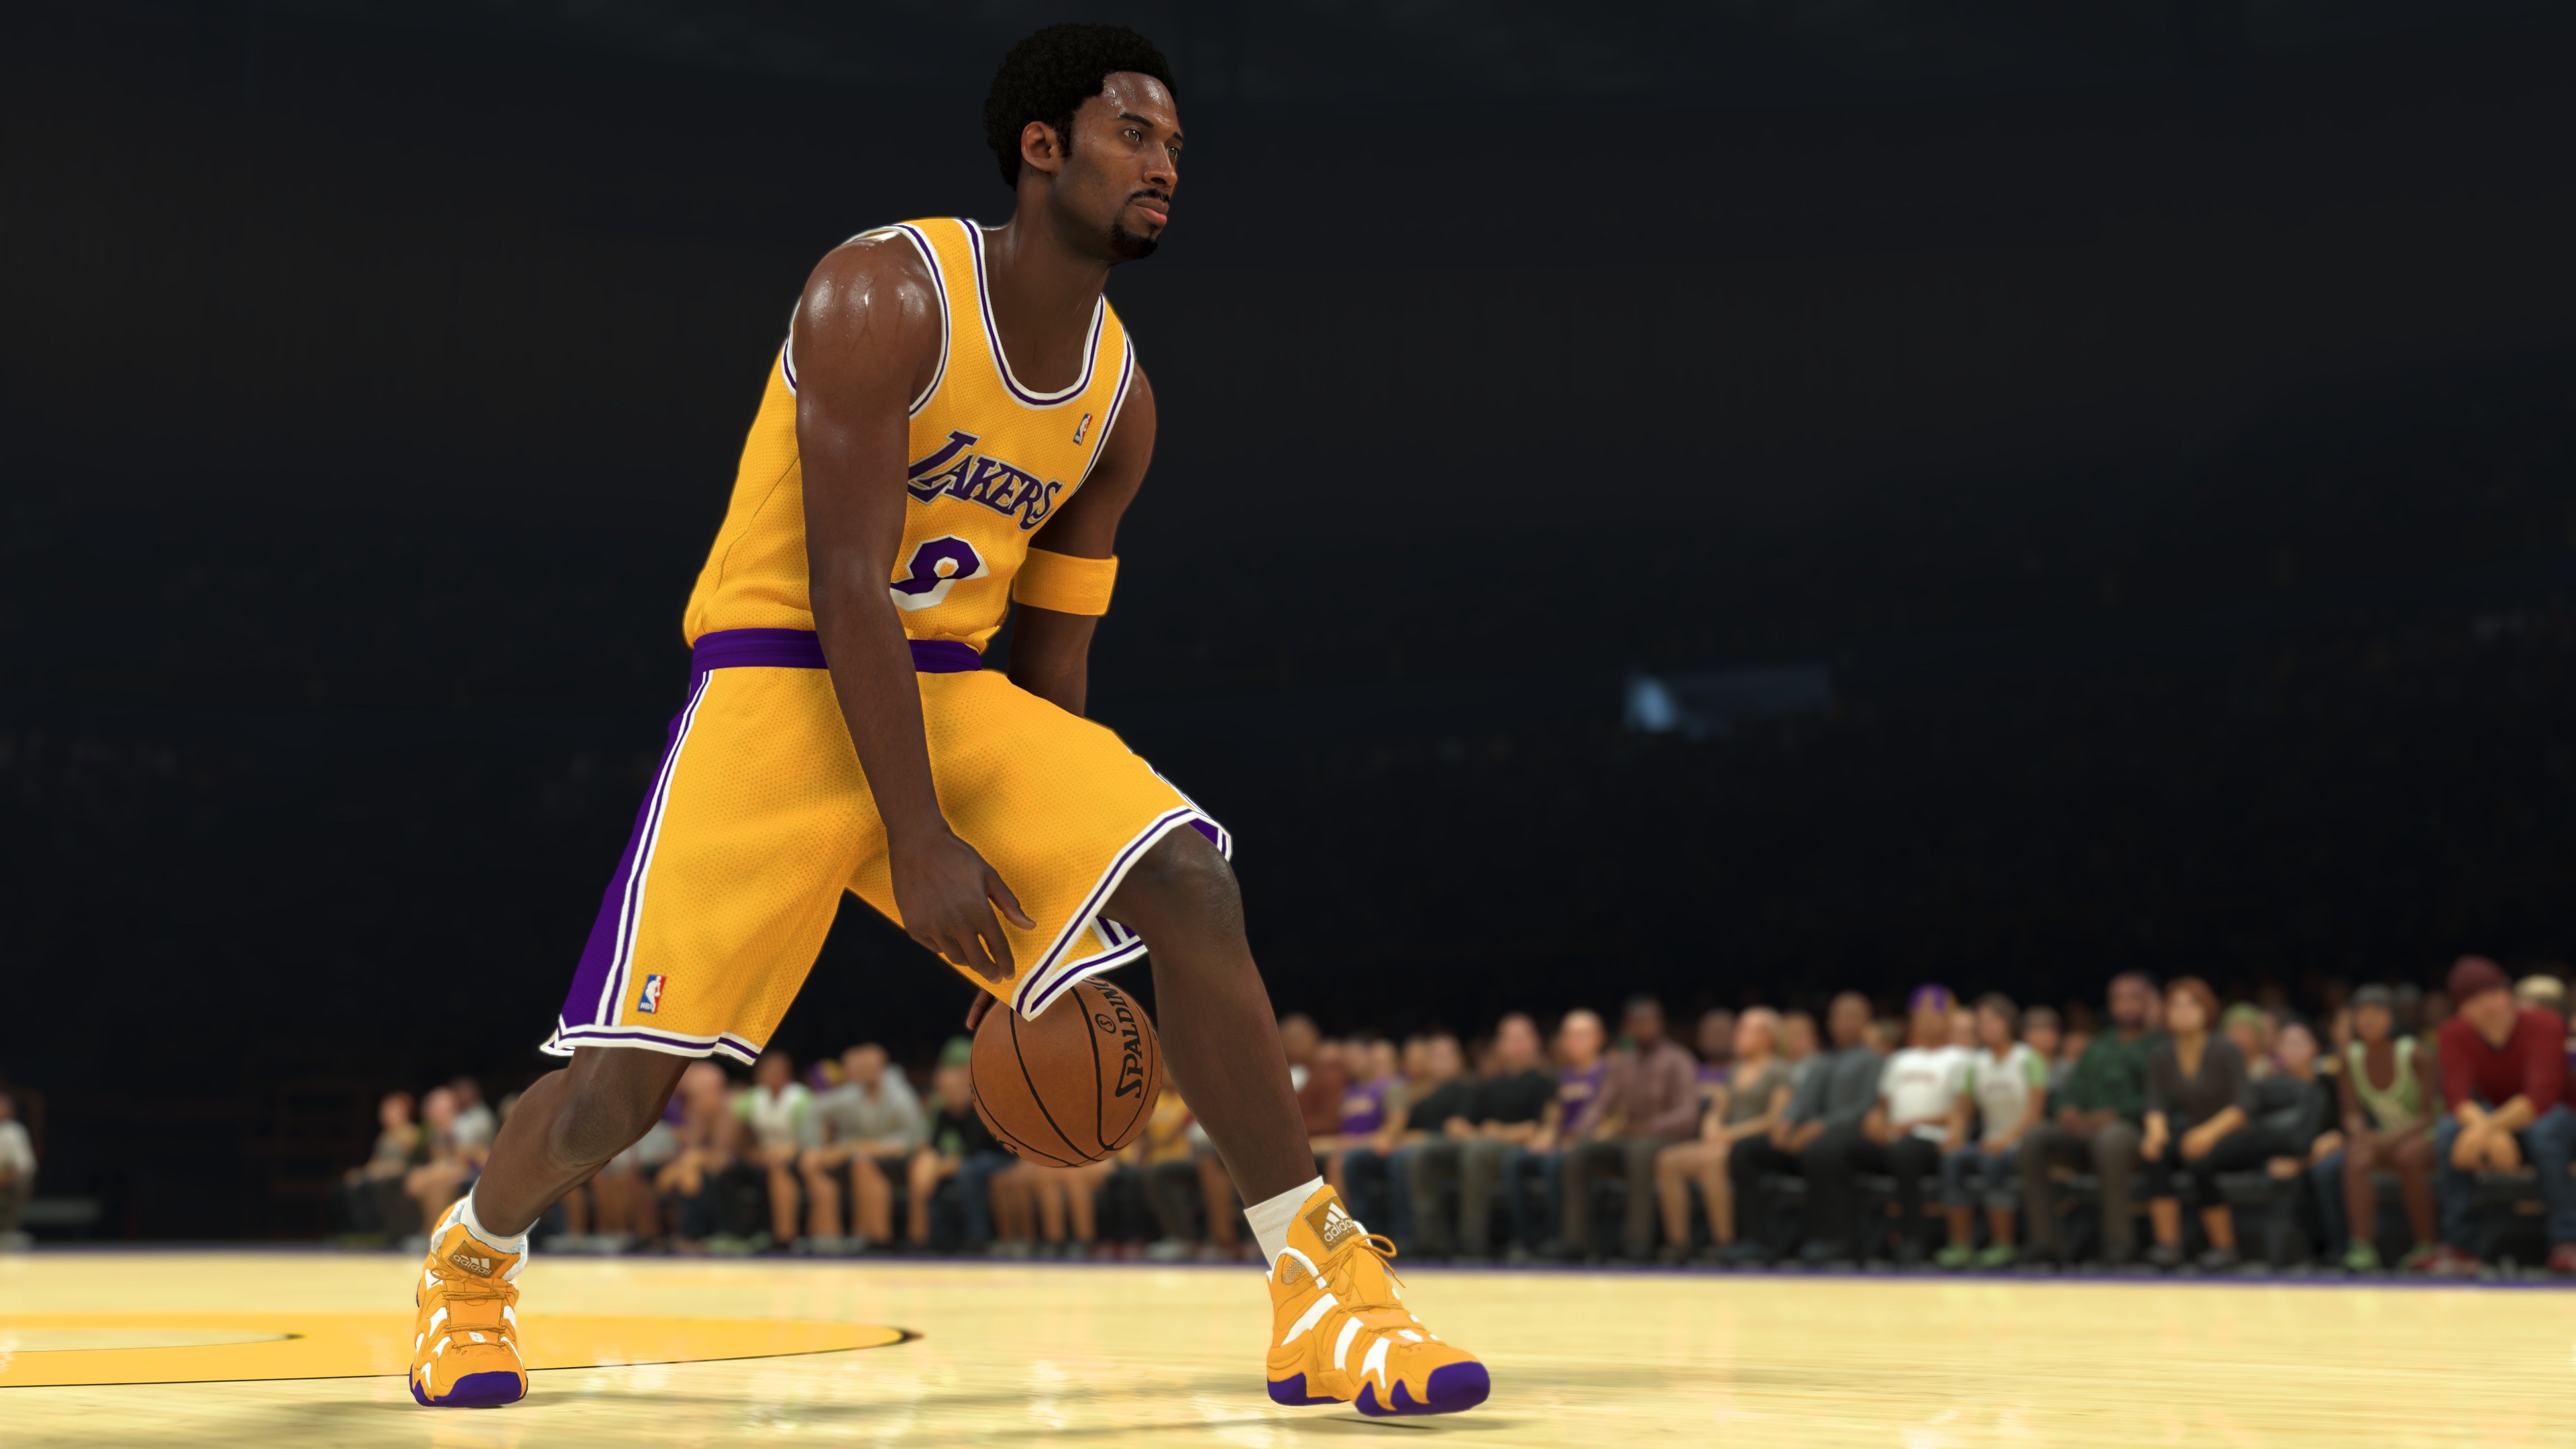 NBA 2K21 is this week’s free game from the Epic Games Store